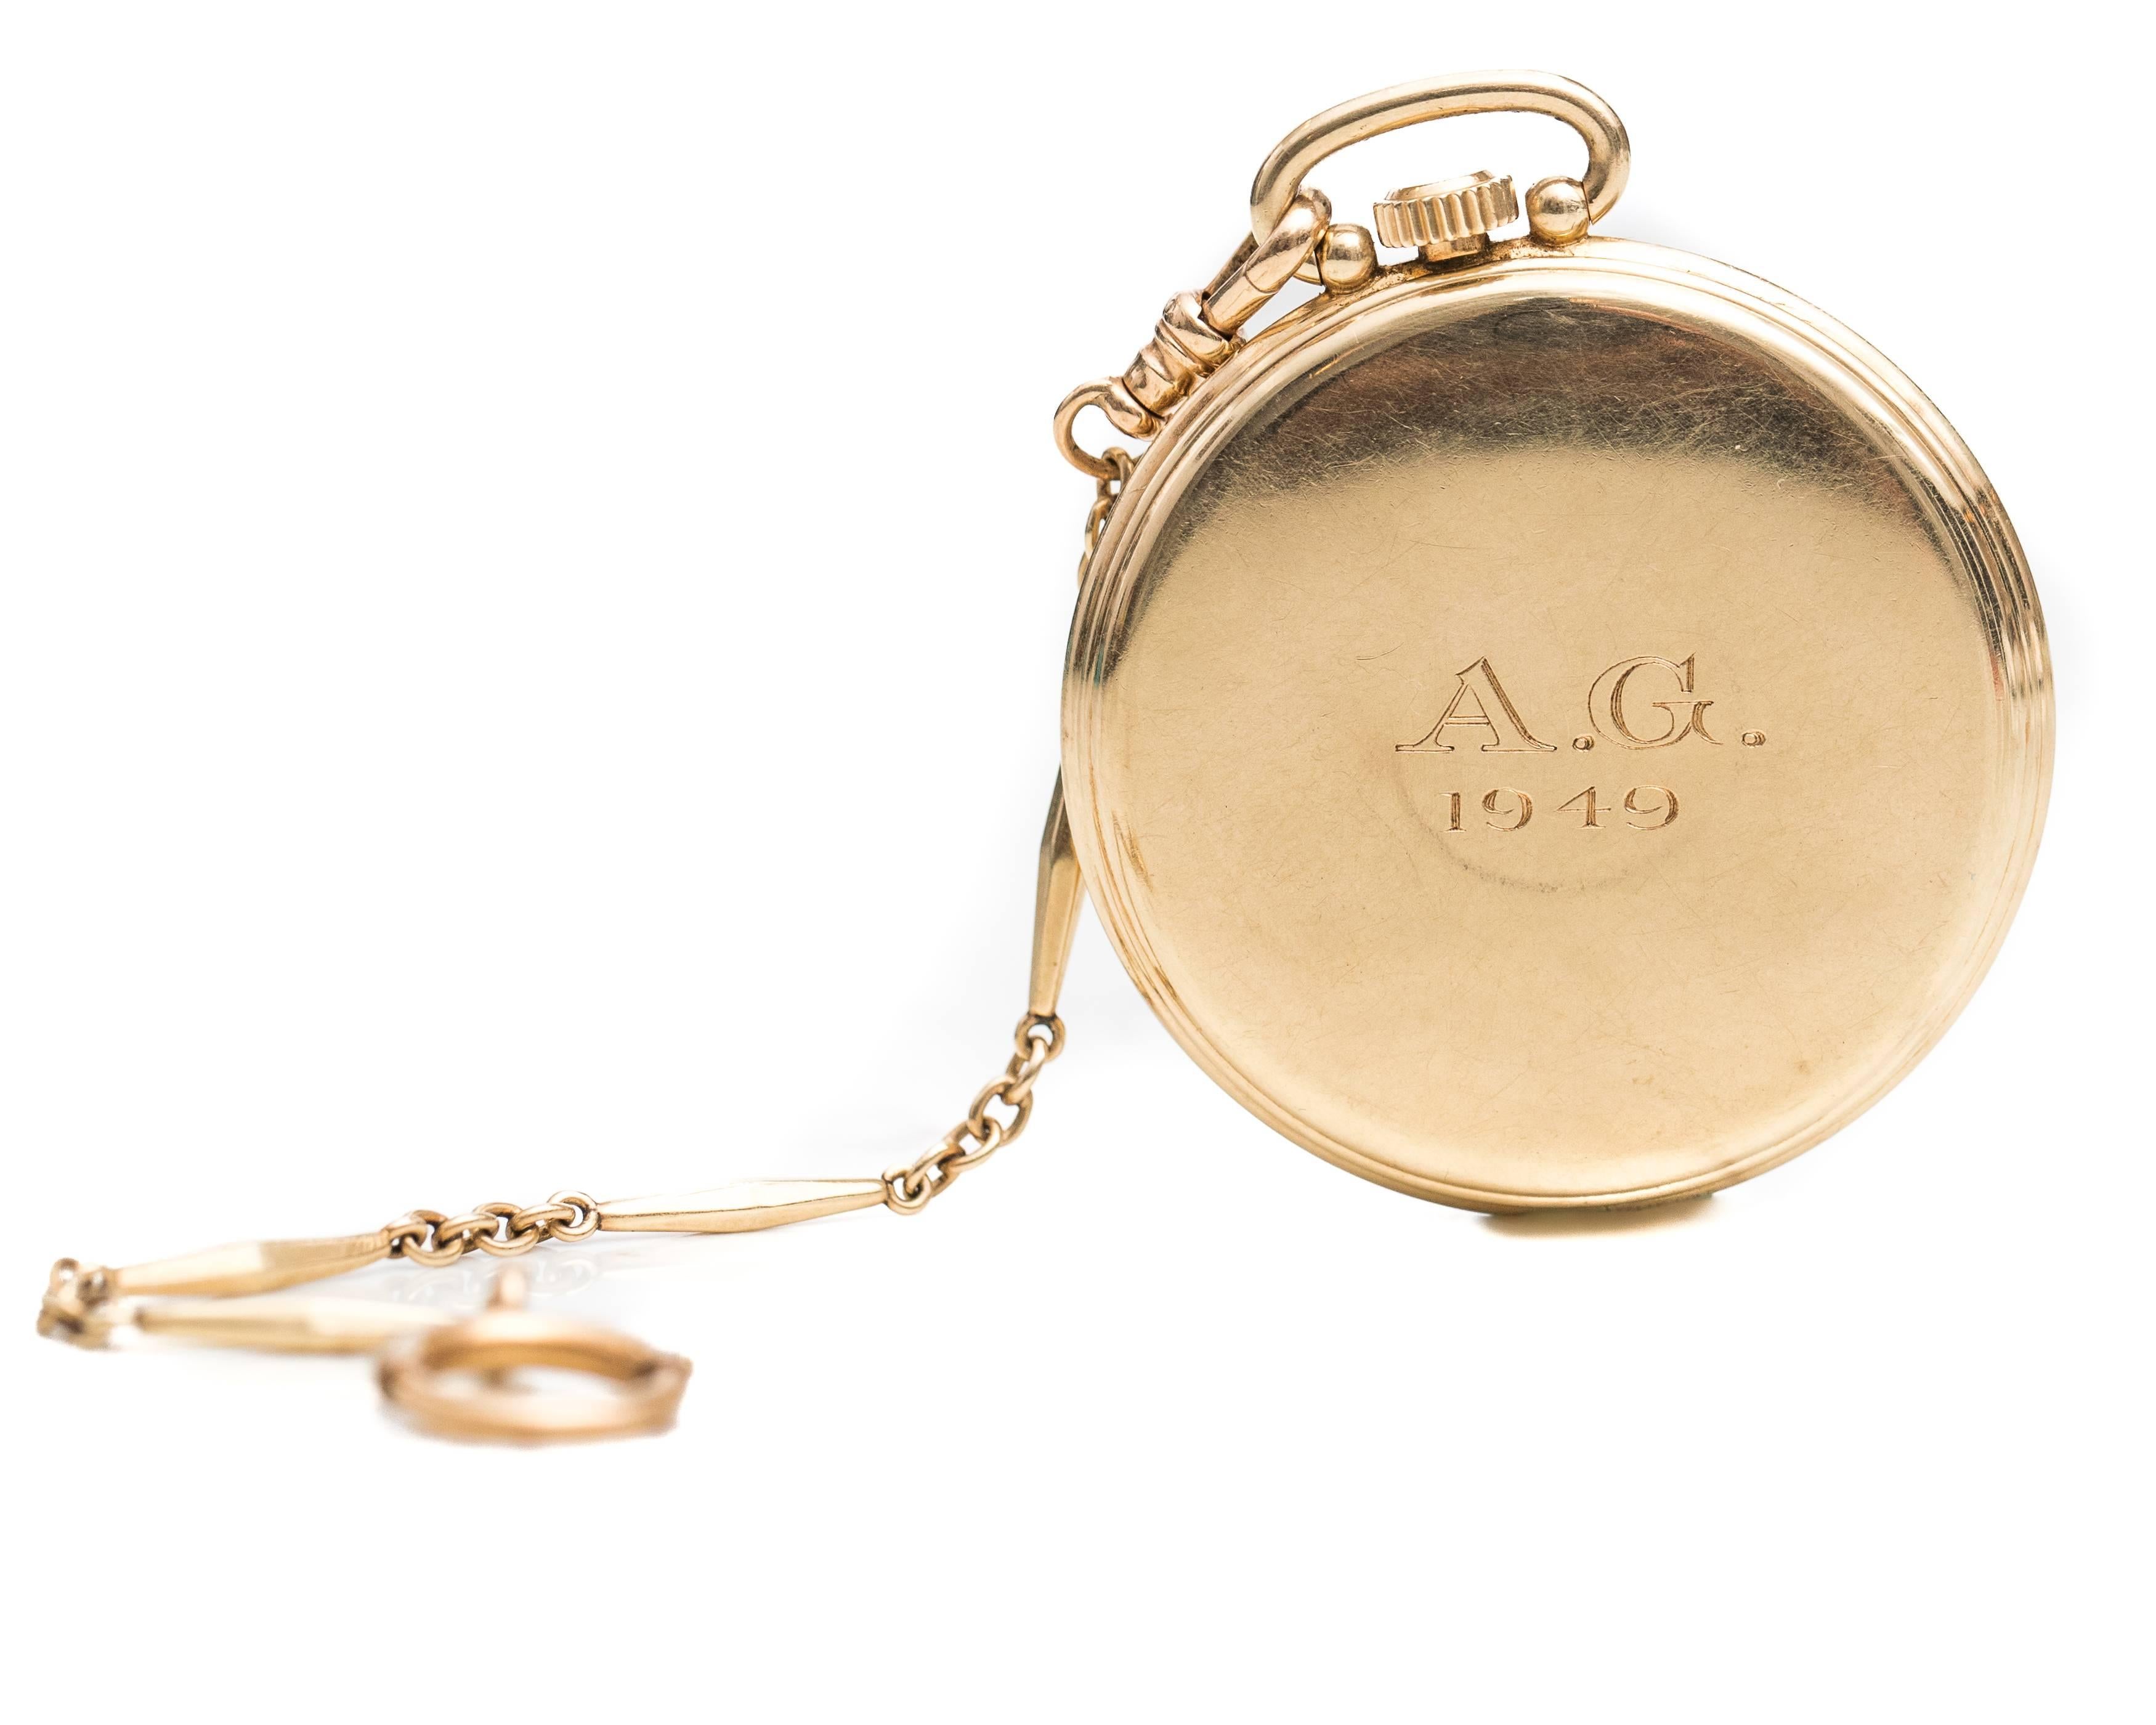 1949 Hamilton 14 Karat Yellow Gold Pocket Watch

Features a silvery antique white dial, gold Arabic numbers, gold Alpha hands and a Seconds Subdial at the 6:00 position. This stunning Gold Pocket Watch has a smooth, high polish back. The back is